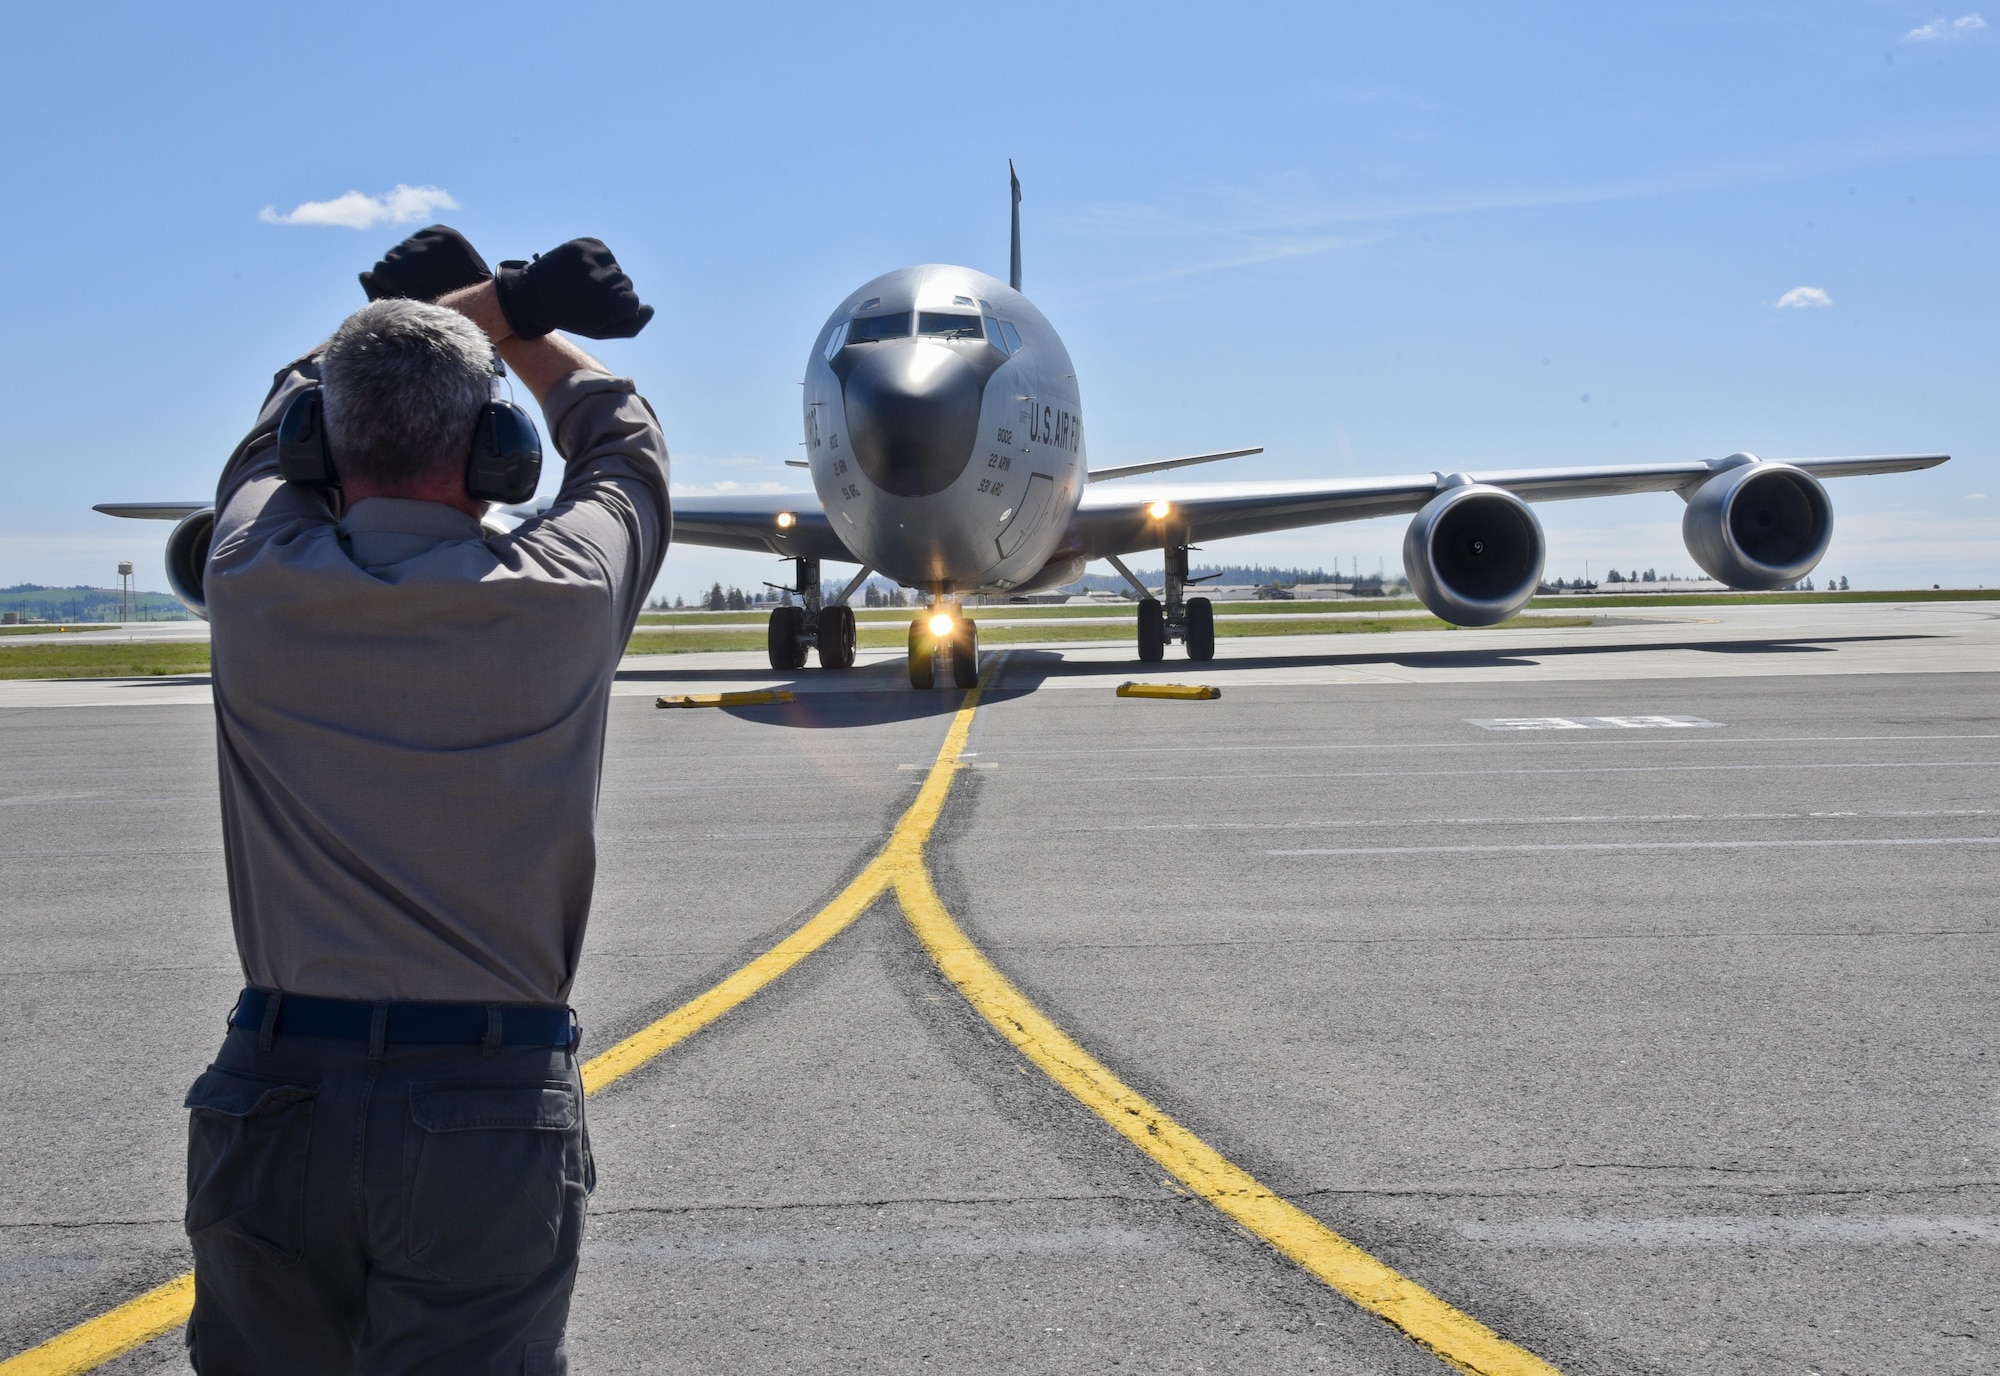 Kenneth Goulding, a 92nd Maintenance Squadron transient alert aircraft servicer, taxies in a KC-135 Stratotanker from McConnell Air Force Base, Kan., April 26, 2016, at Fairchild AFB, Wash. Because of its ramp space, logistical capabilities and maintenance facilities, Fairchild AFB received six KC-135 Stratotankers that were evacuated from McConnell AFB due to projected severe weather. (U.S. Air Force photo/Airman 1st Class Taylor Bourgeous) 